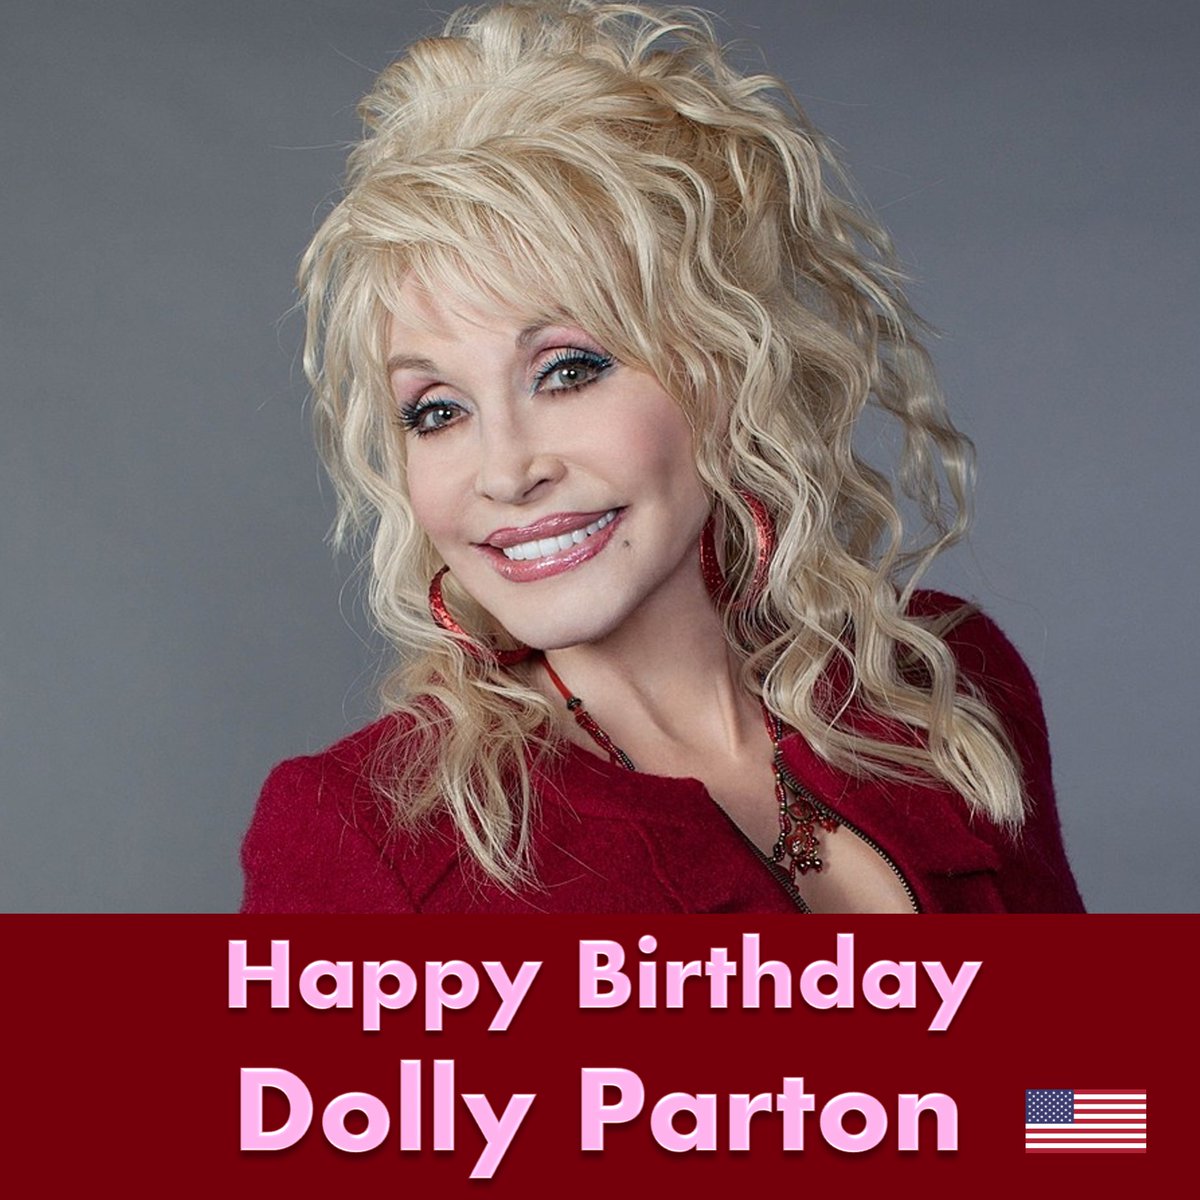 Happy Birthday to the beautiful, chart-topping, record-breaking and history-making Country Music Legend, #DollyParton! The award-winning singer-songwriter has sold over 100 million records worldwide, making her one of the best-selling artists of all time. She has had 25 singles…